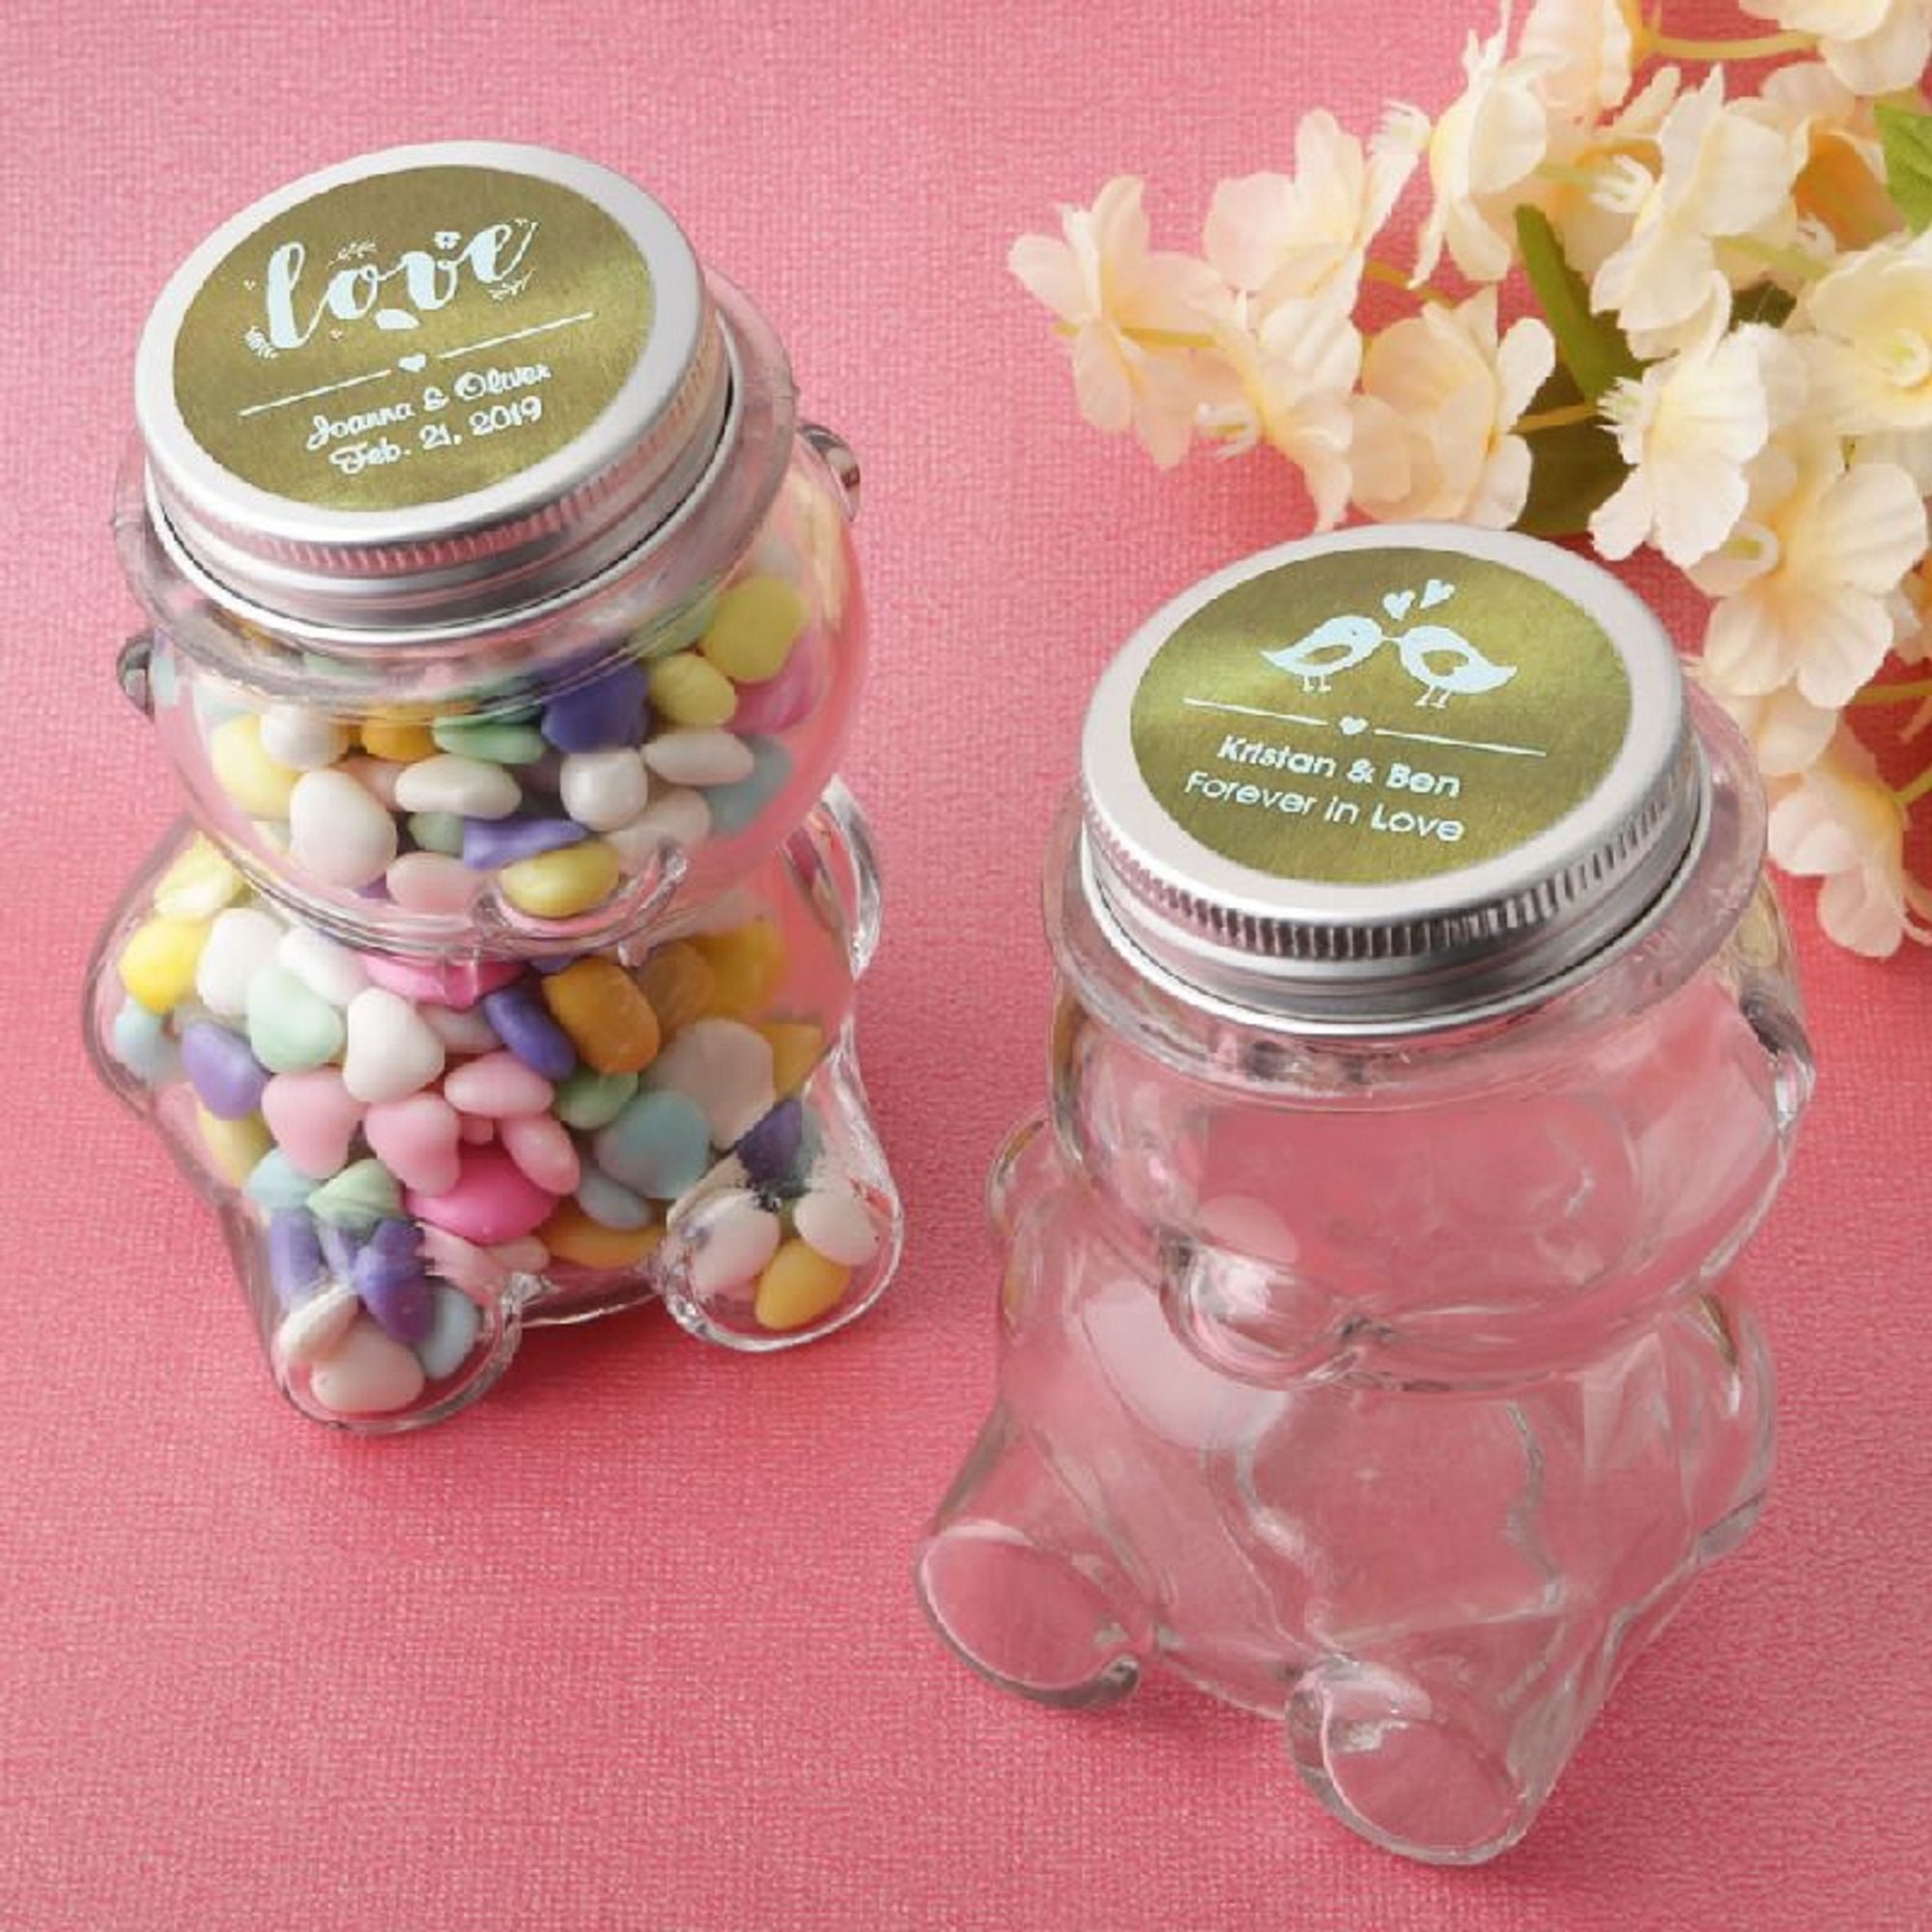 36 X Small Glass Preserving Conserve Jar With Gold Lids 250ml